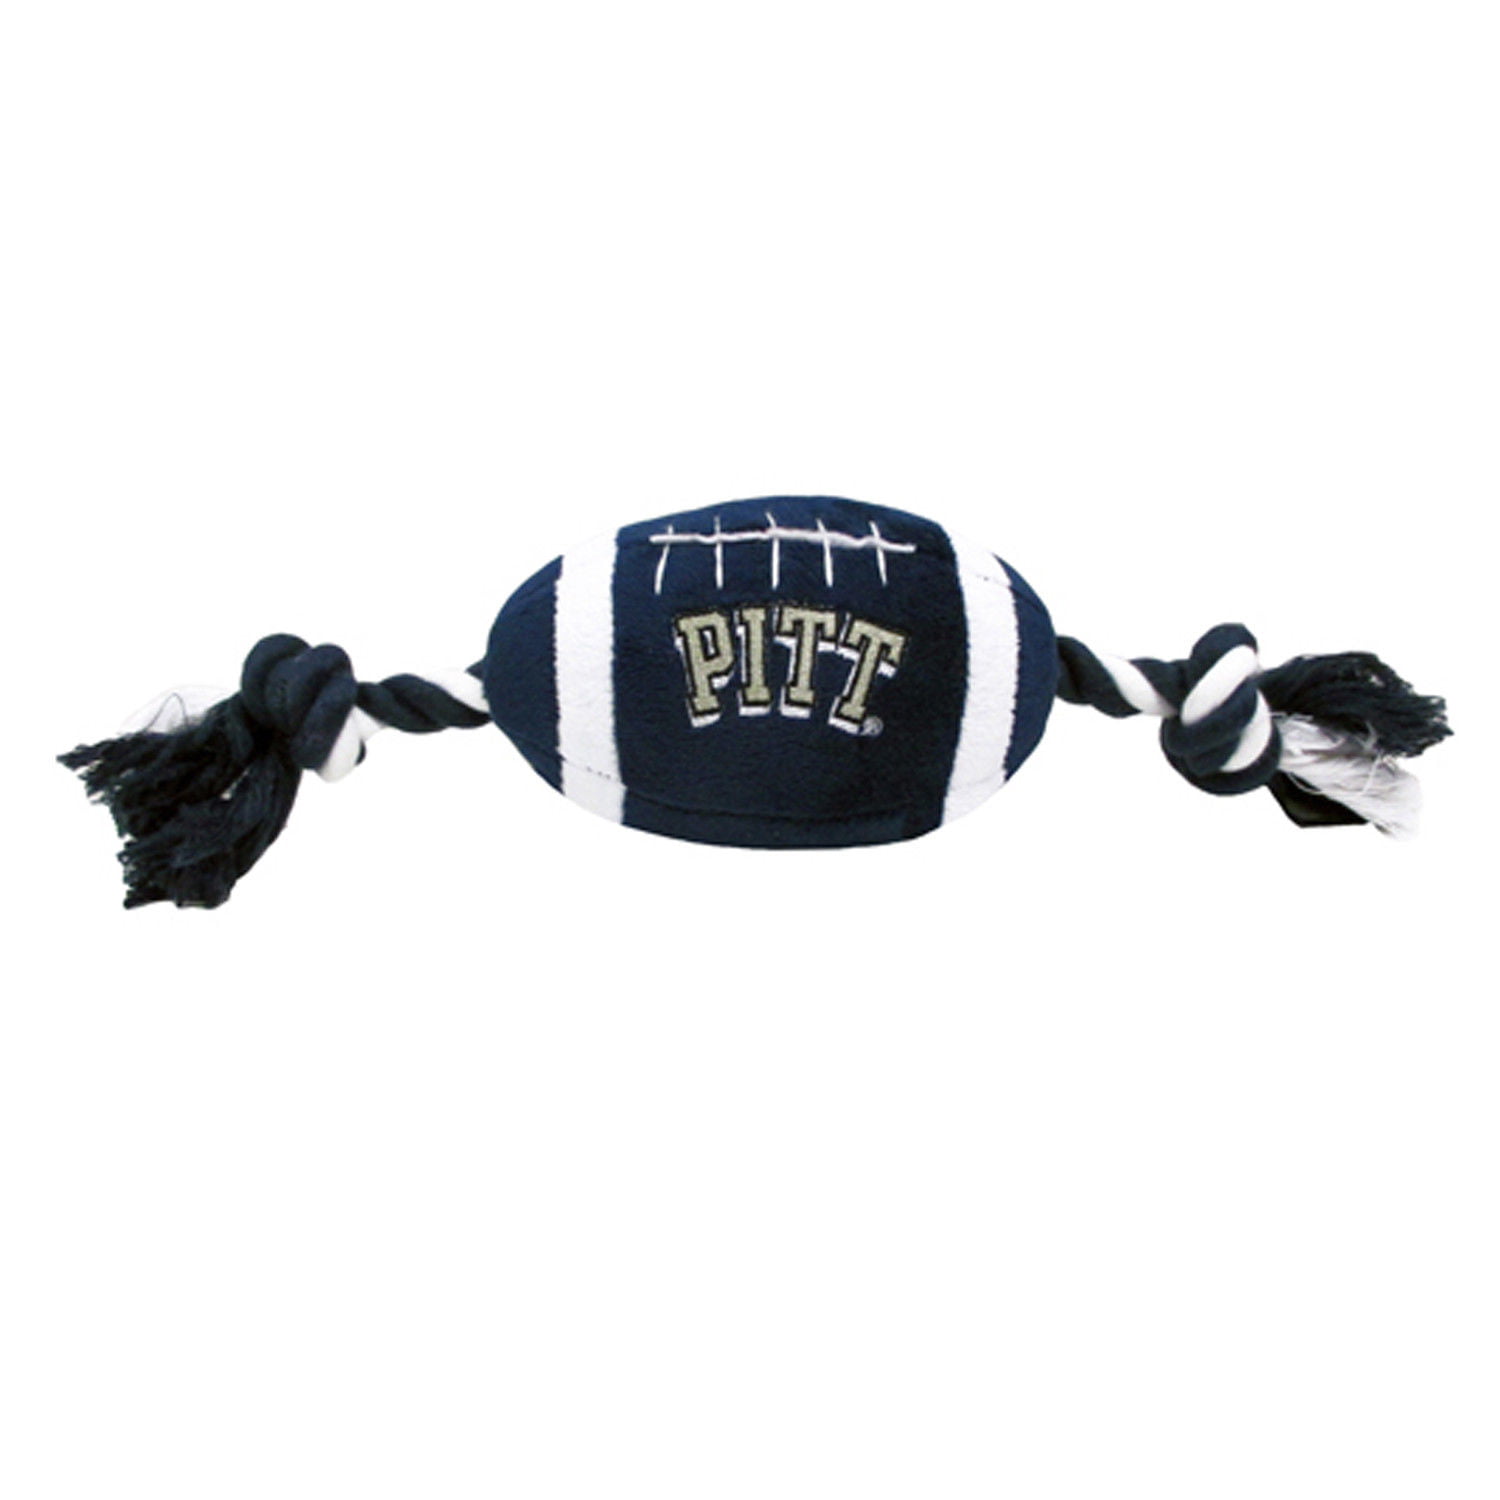 Pets First NCAA Plush Football Rope Toy for Dogs & Cats Chewy & Squeaky! Soft